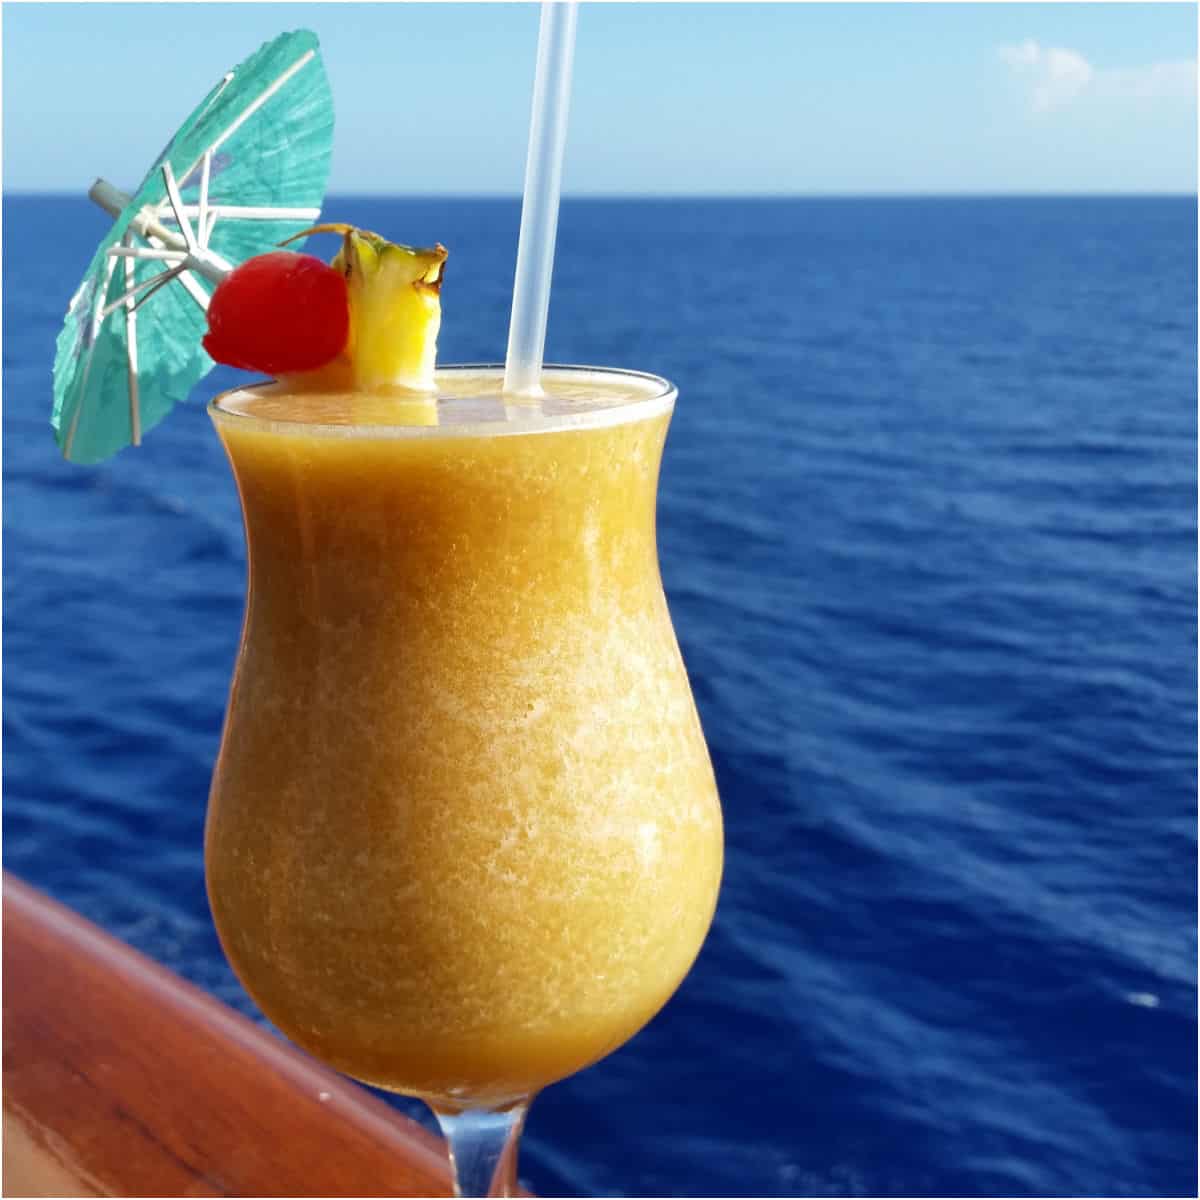 Yellow dirty banana cocktail in a hurricane glass with the ocean background